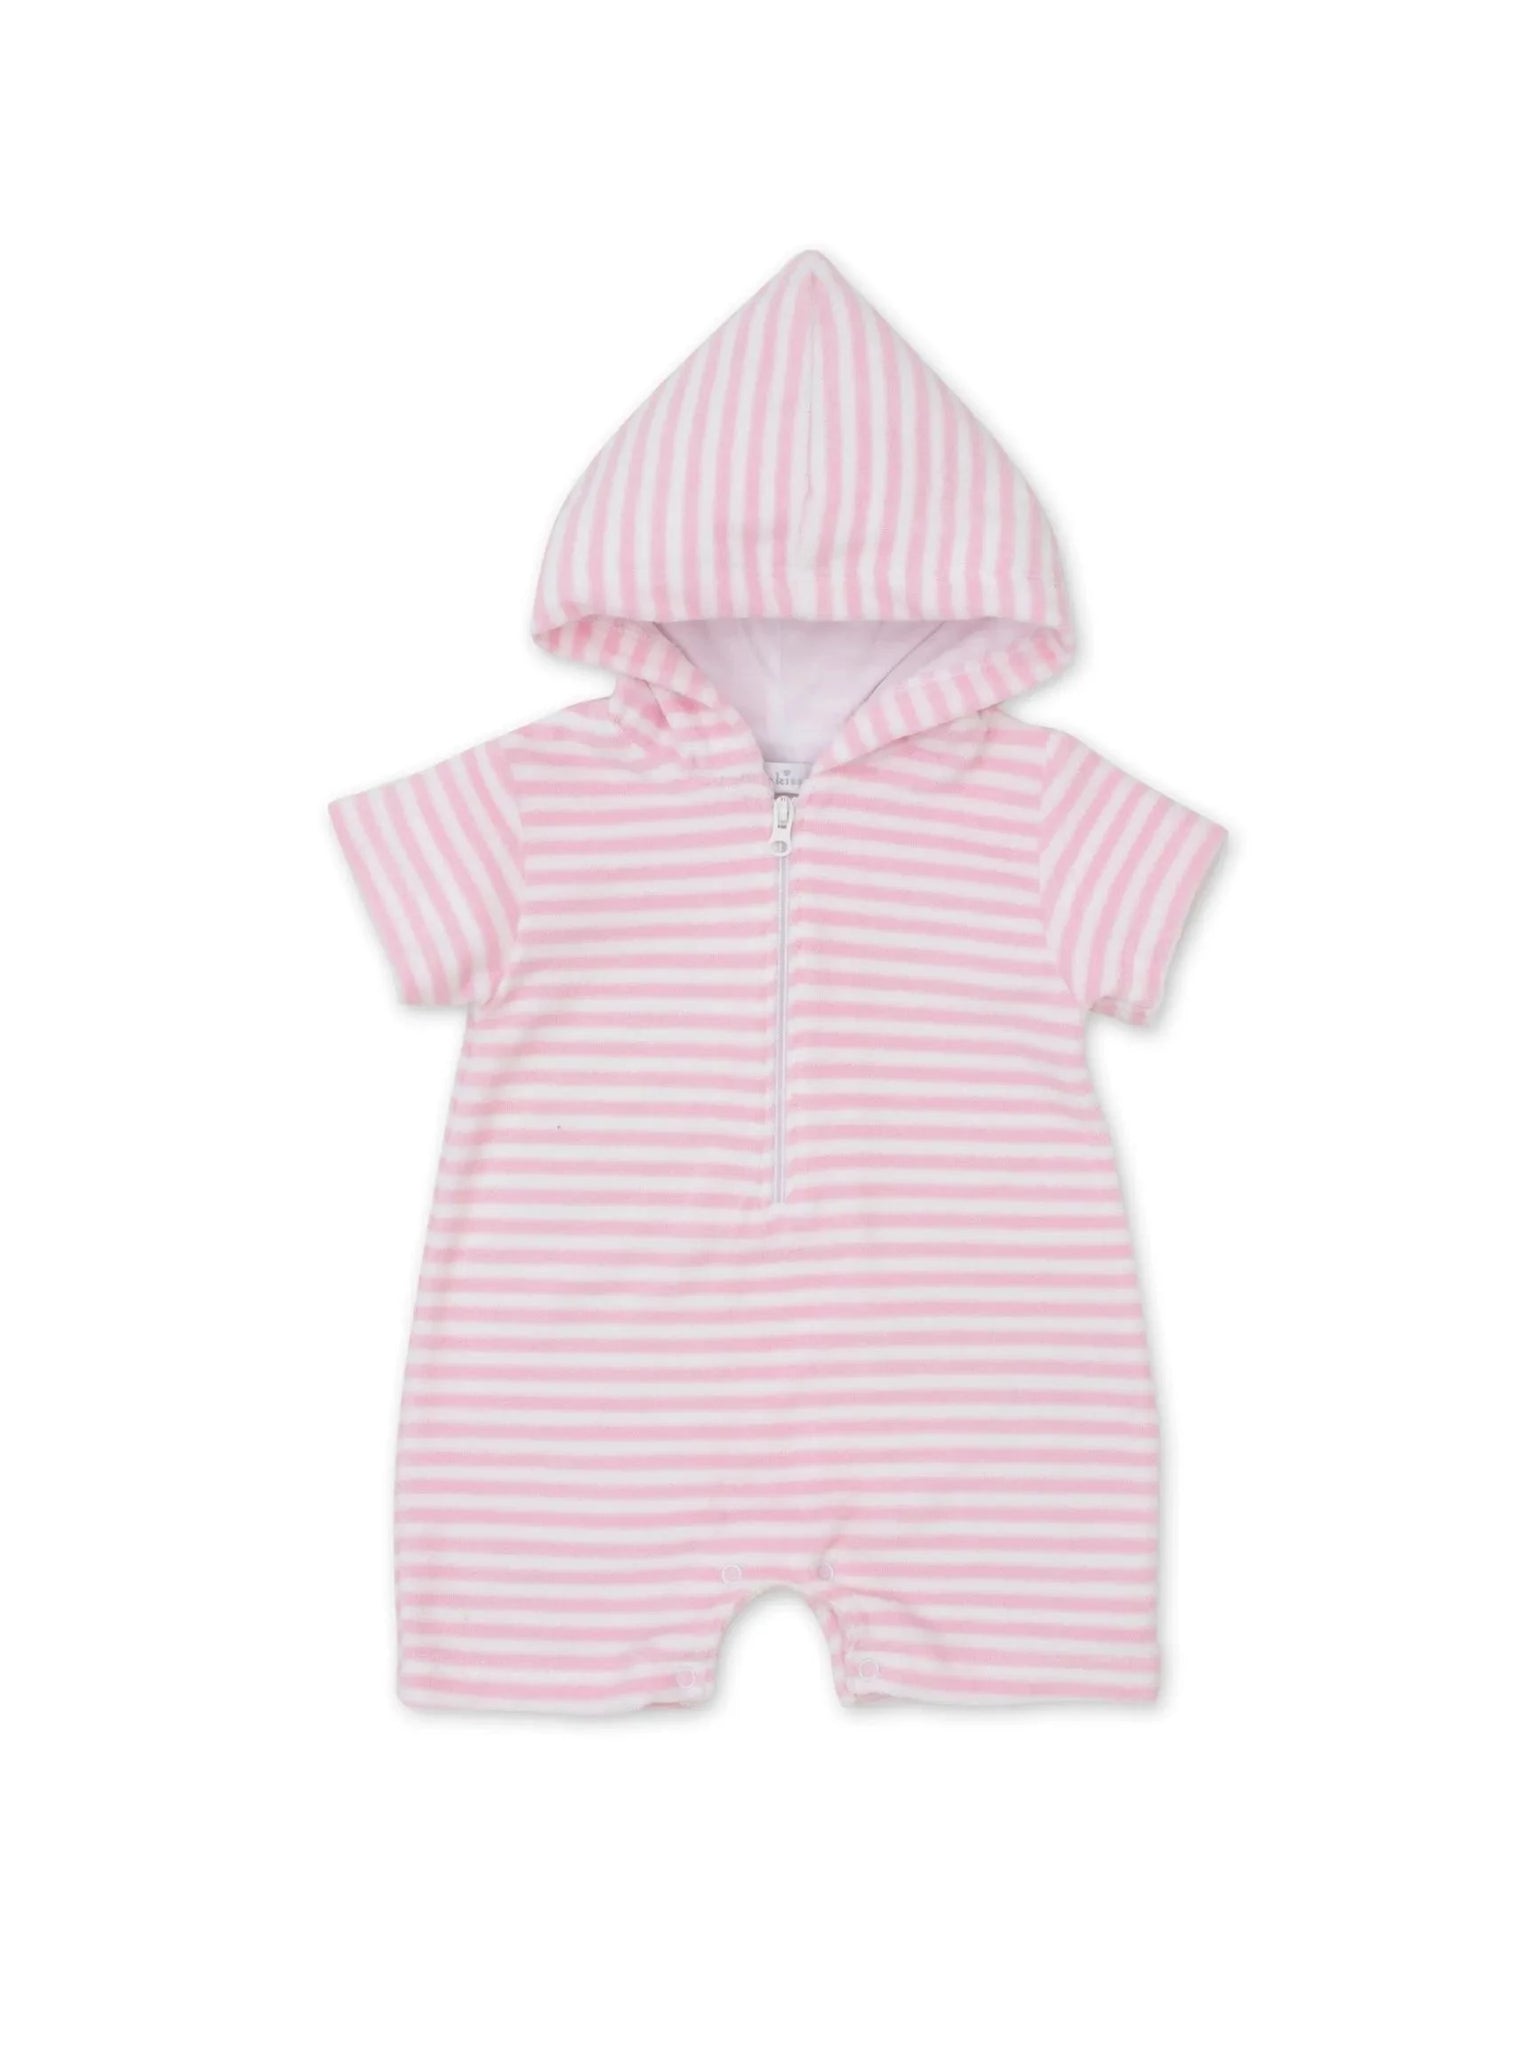 pink and white striped terry hooded romper